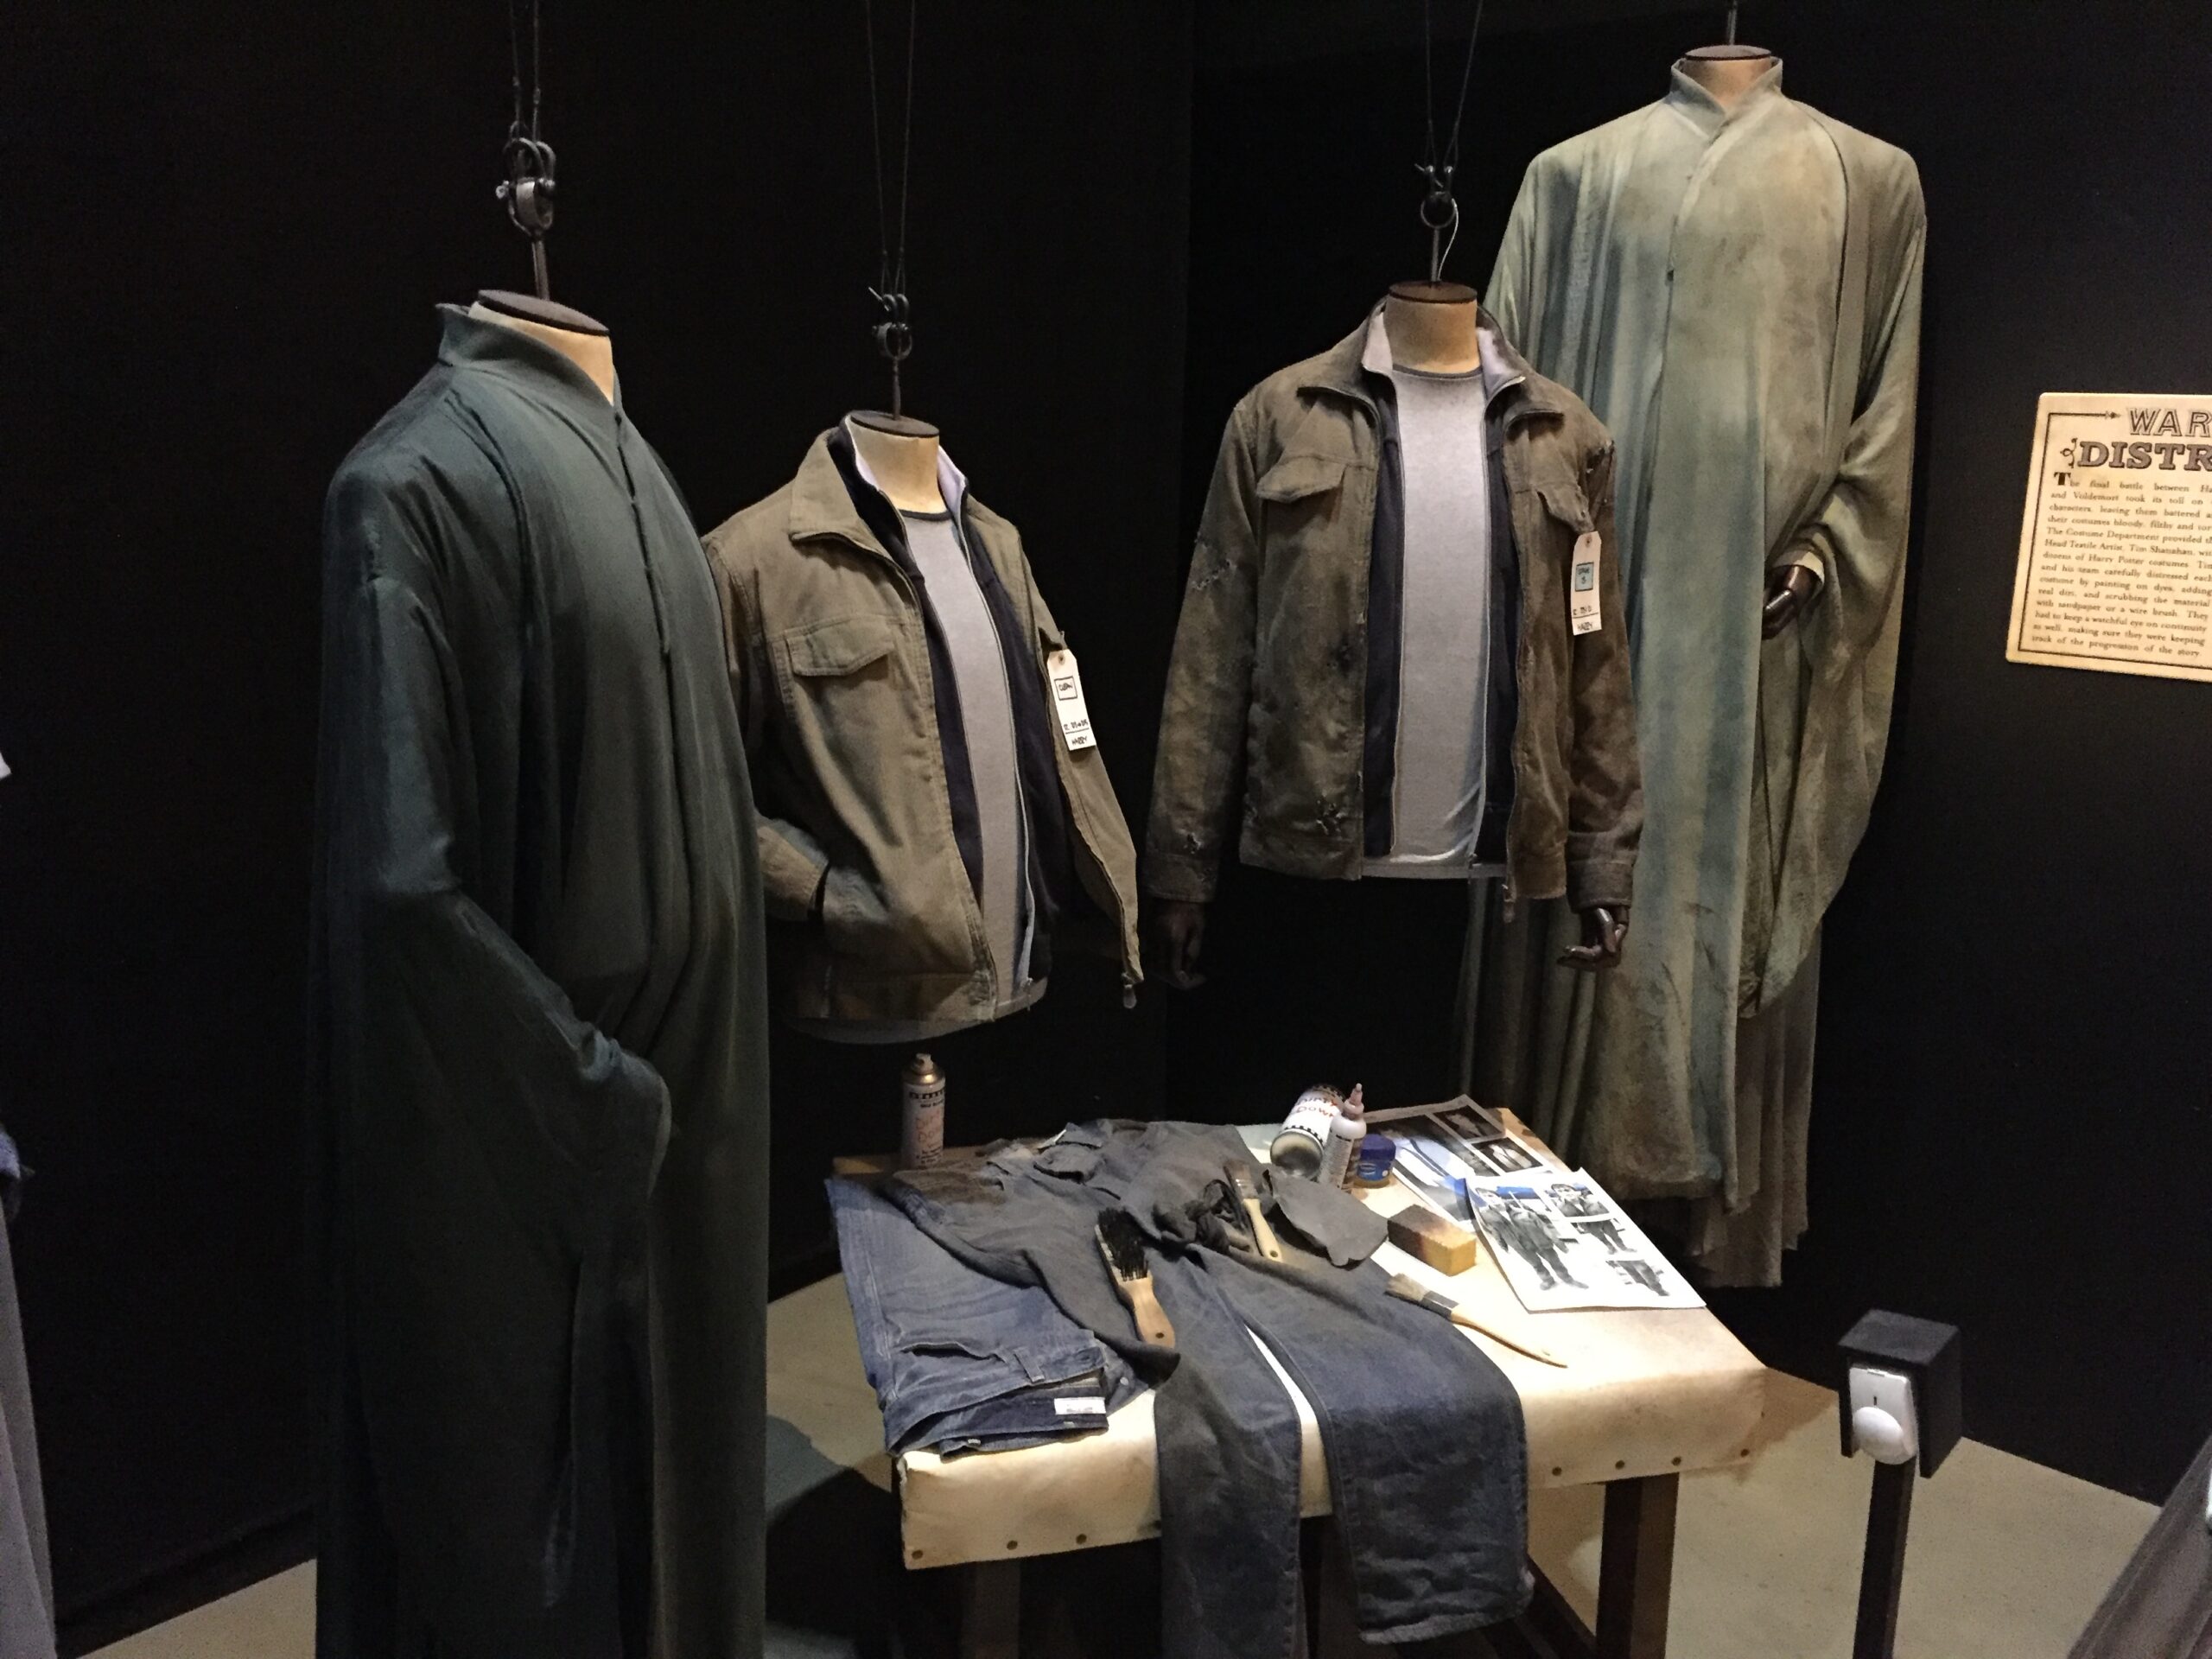 I loved getting to see the shirt that Harry never grew out of, as well as Voldemort’s robes.